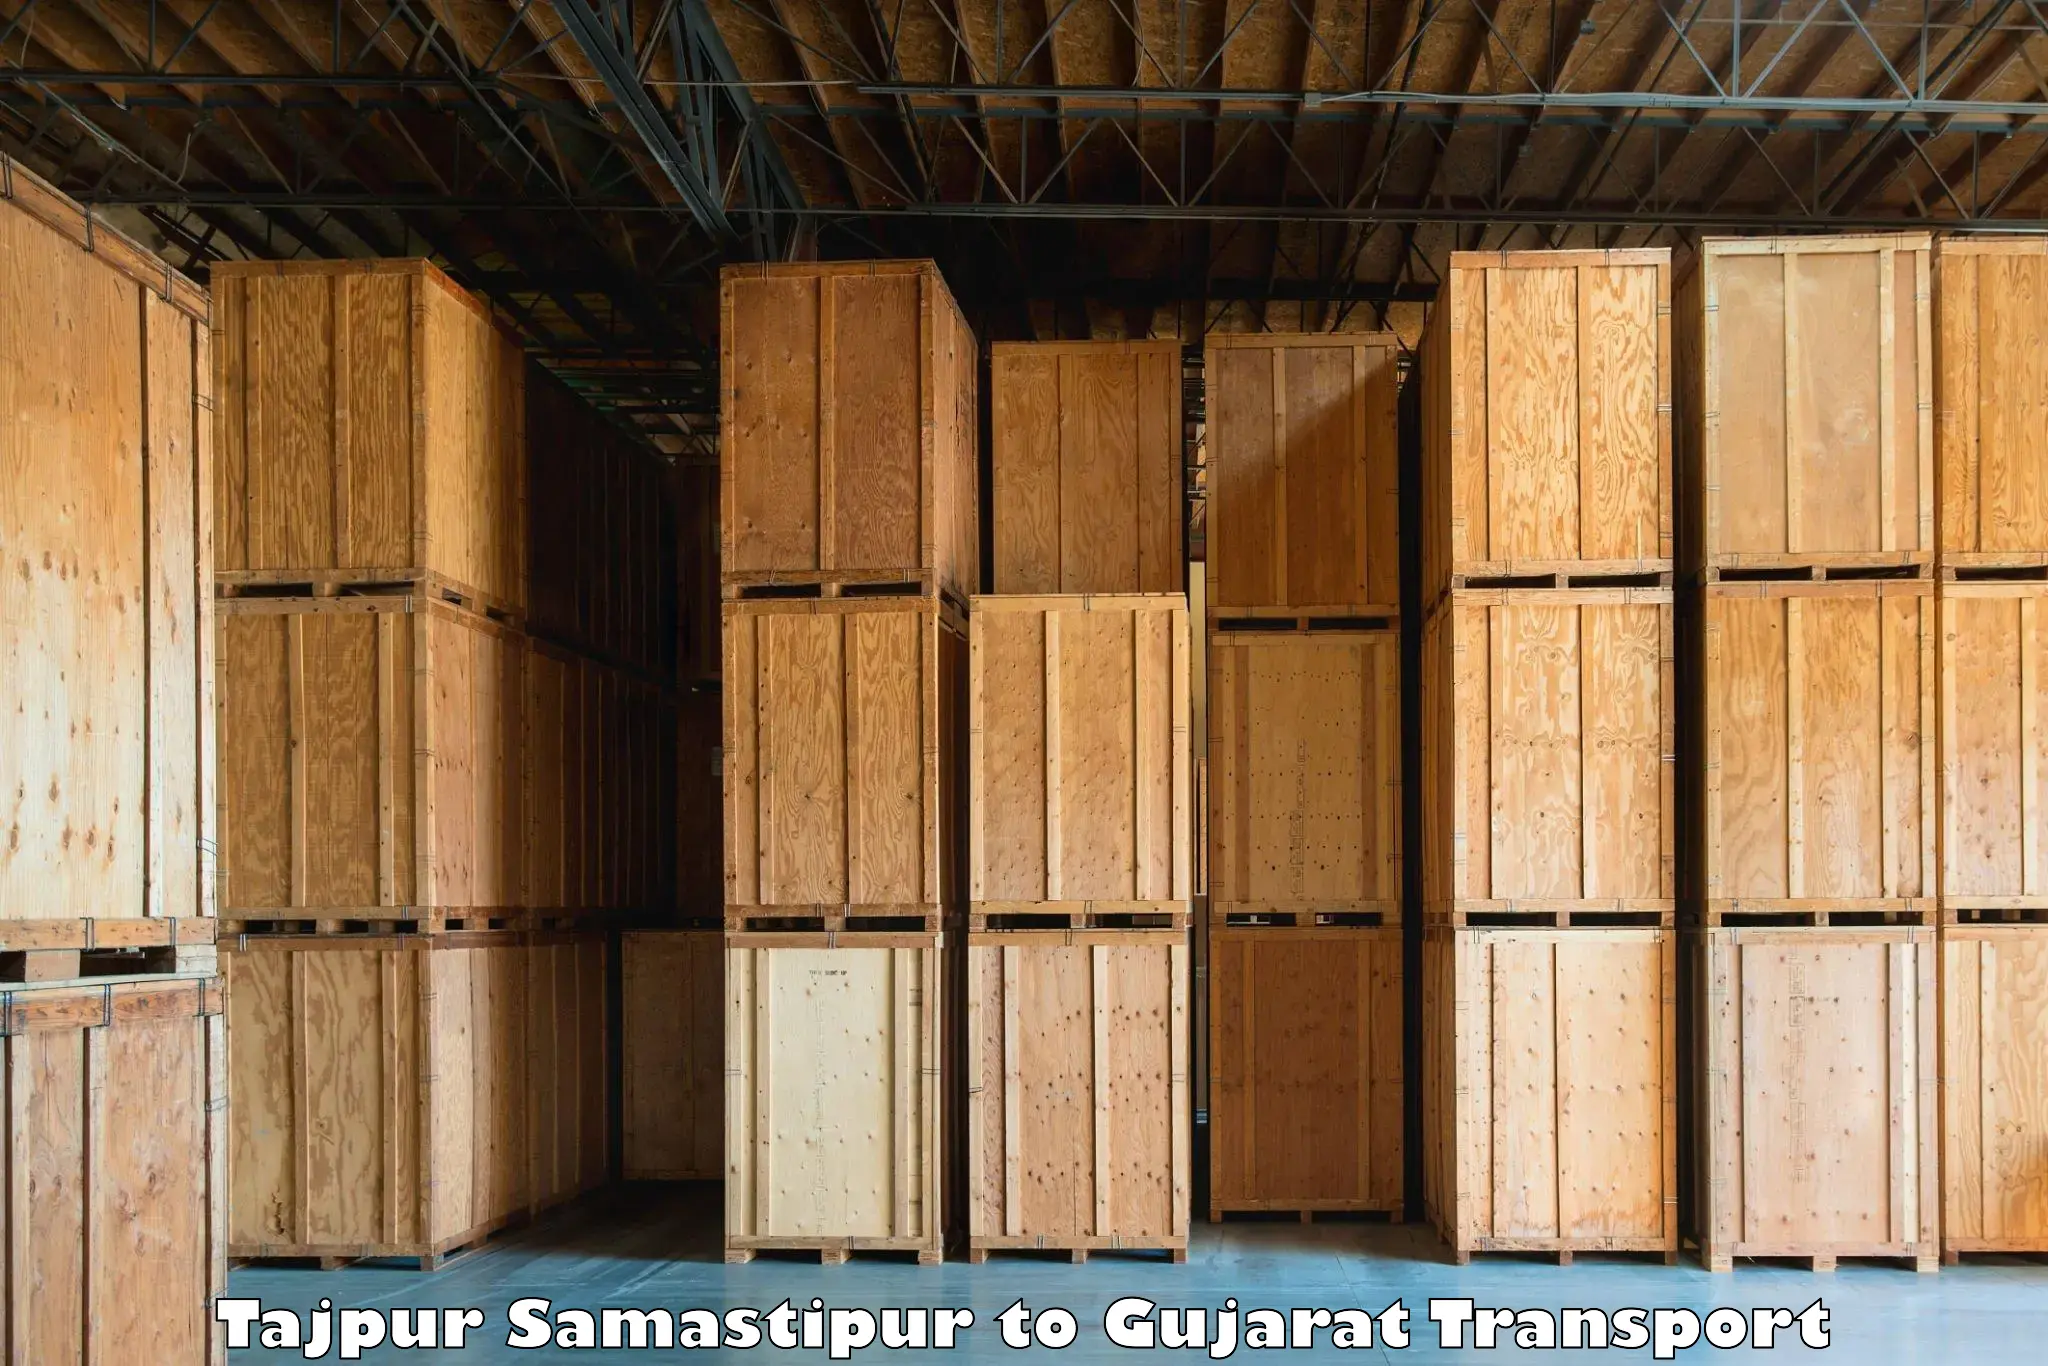 Transport bike from one state to another Tajpur Samastipur to Jamnagar